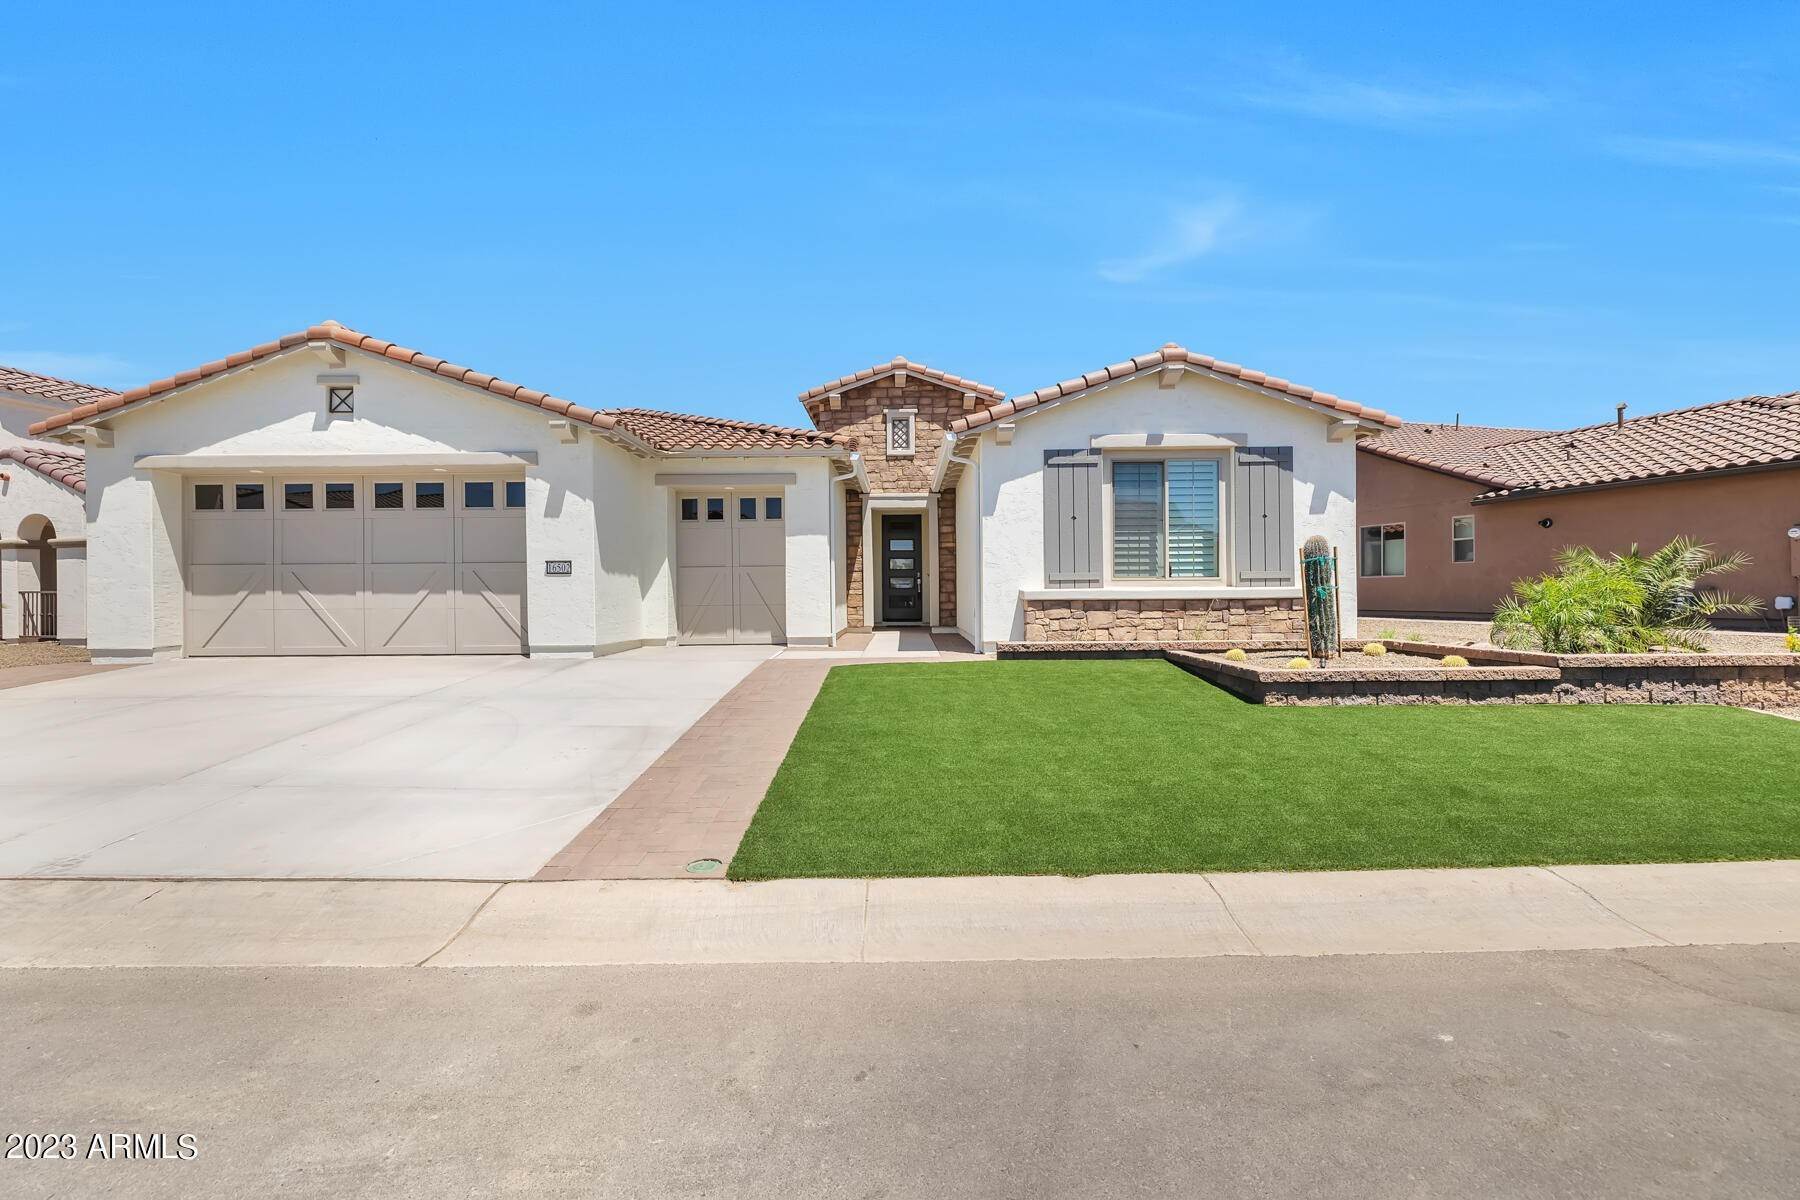 35. Single Family for Sale at Goodyear, AZ 85395